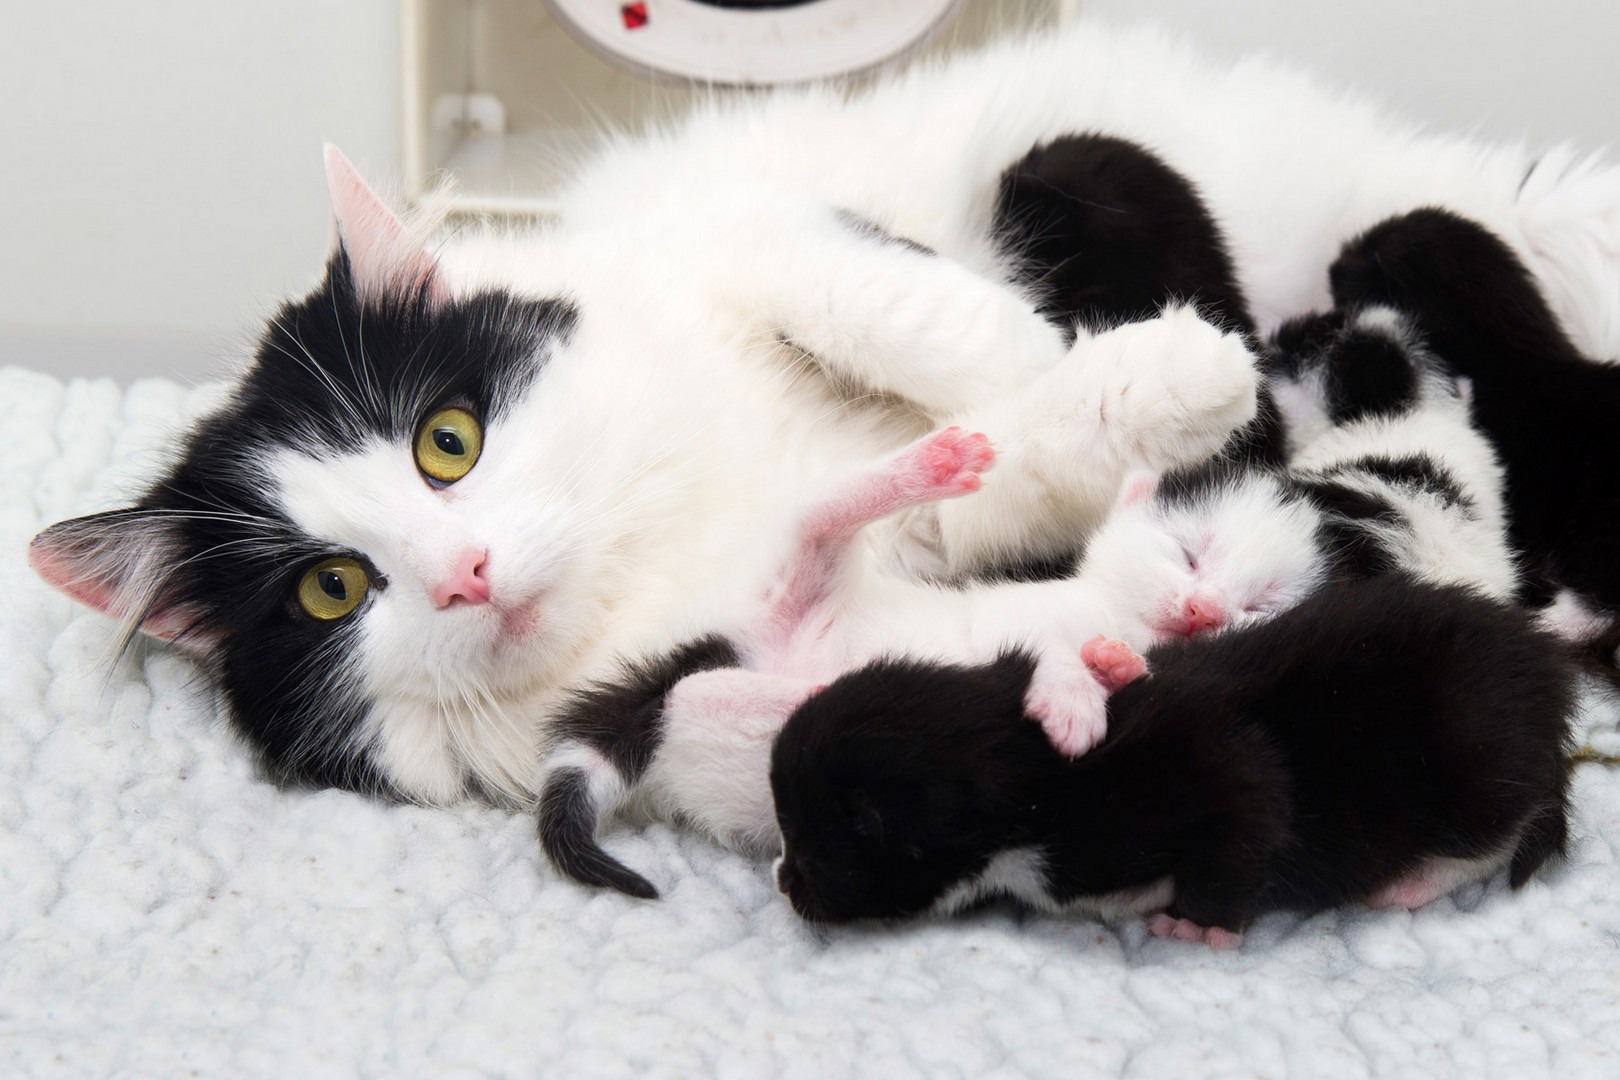 Pregnancy and kitten care - quick guide